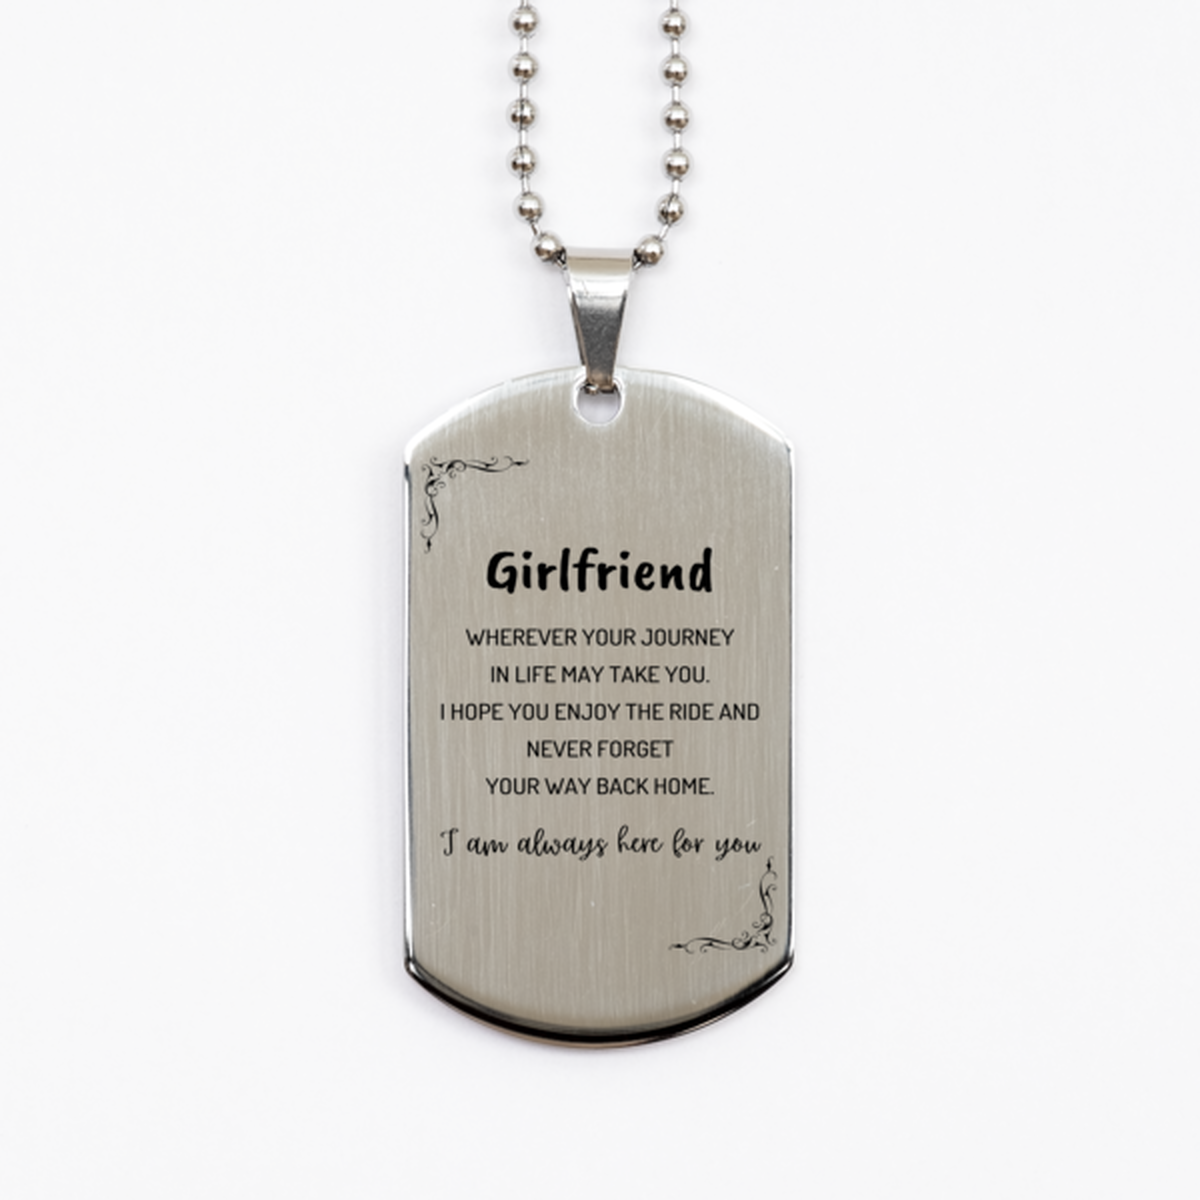 Girlfriend wherever your journey in life may take you, I am always here for you Girlfriend Silver Dog Tag, Awesome Christmas Gifts For Girlfriend, Girlfriend Birthday Gifts for Men Women Family Loved One